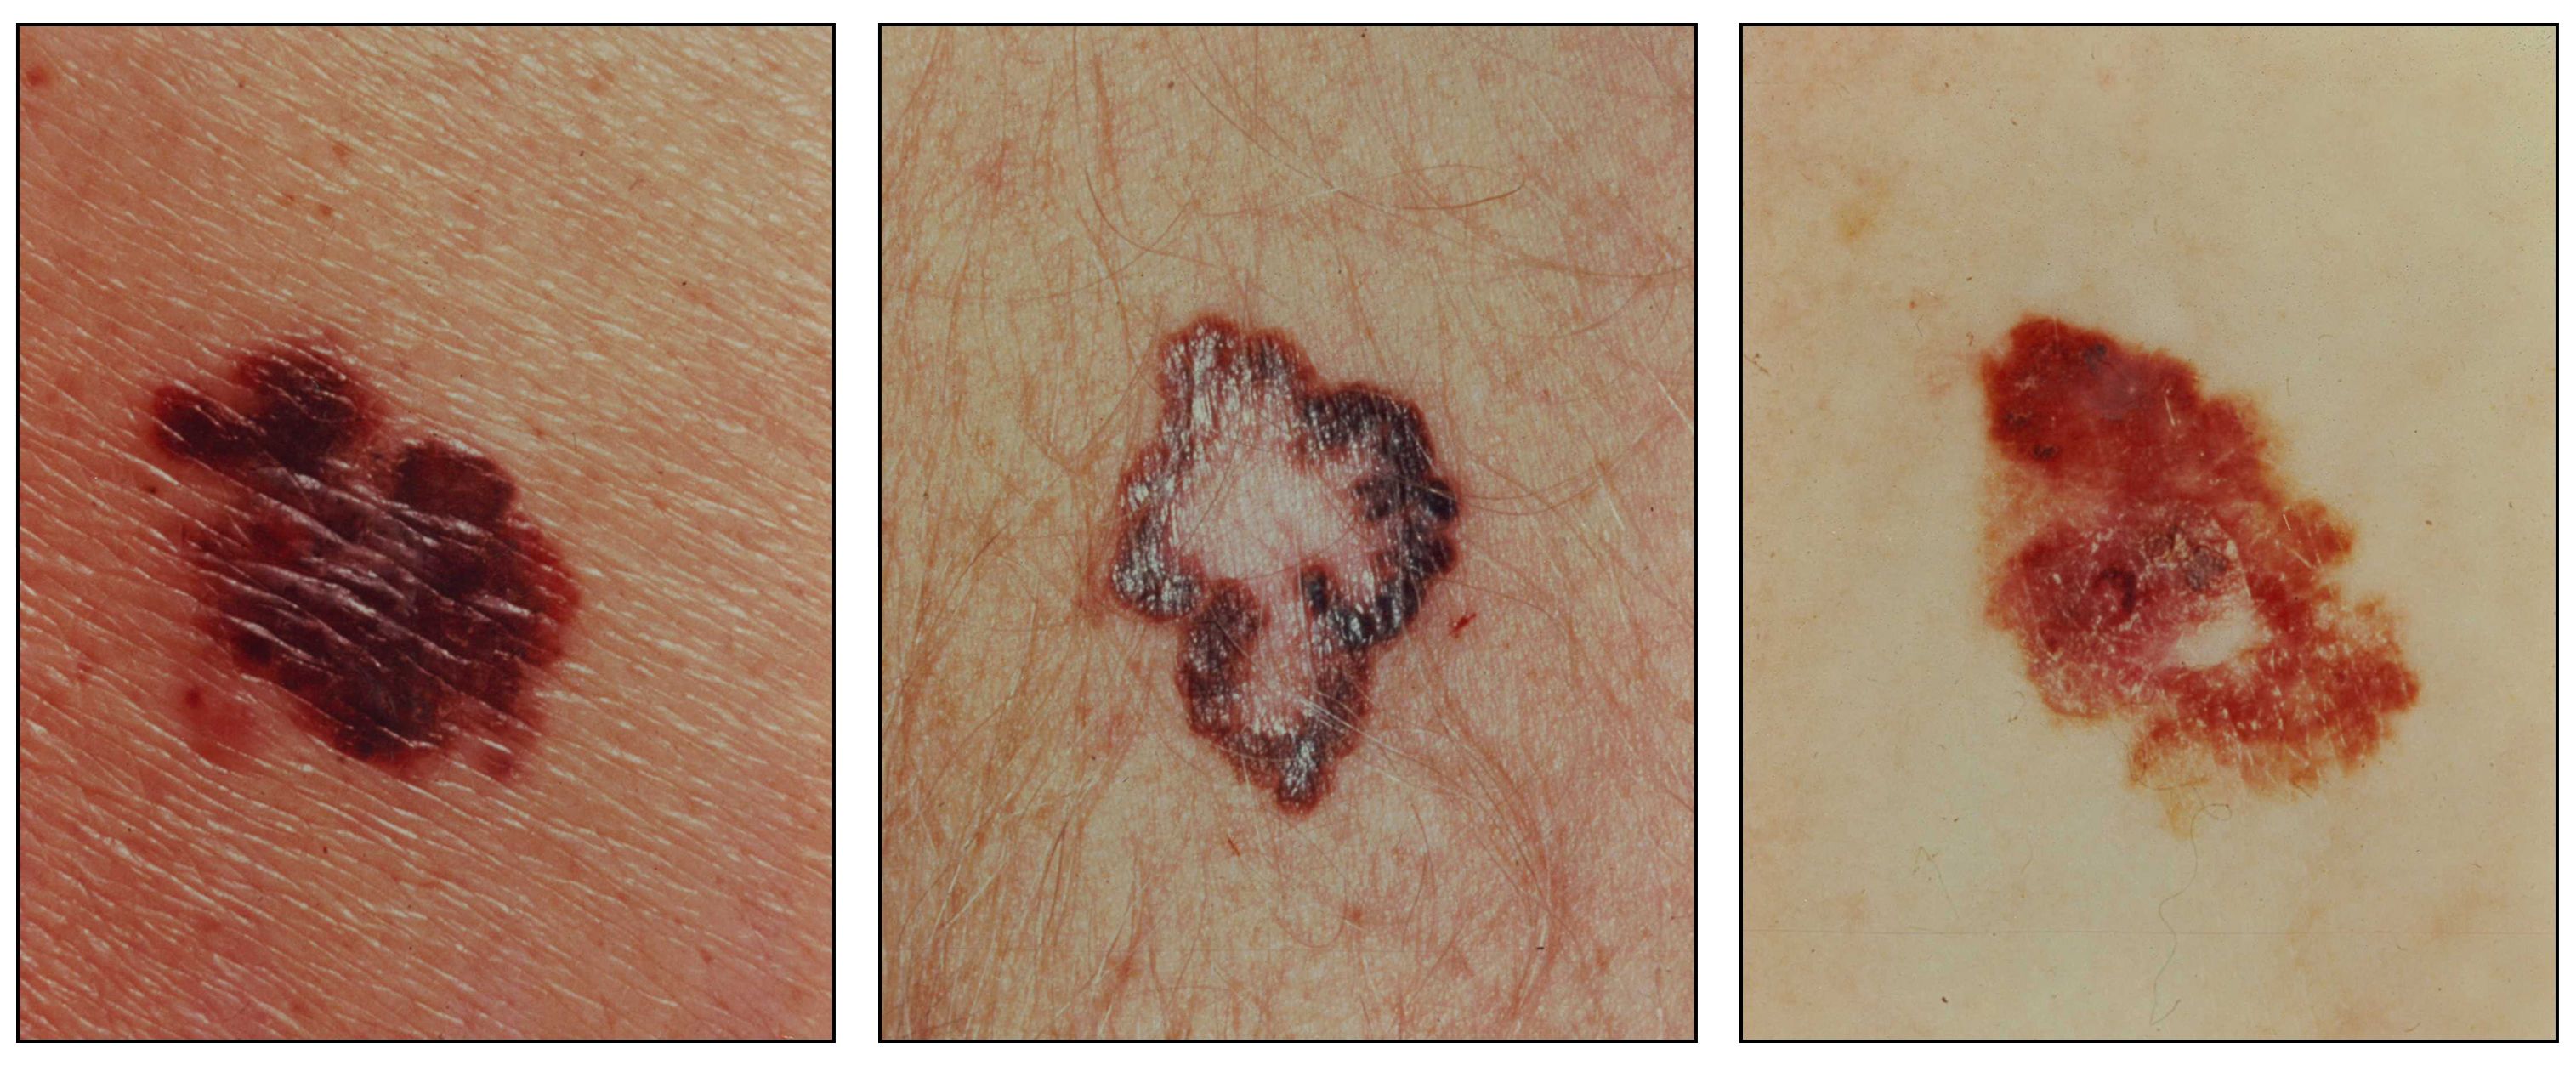 Photographs showing a large, asymmetrical, red and brown lesion on the skin (panel 1); a brown lesion with a large and irregular border on the skin (panel 2); and a large, asymmetrical, scaly, red and brown lesion on the skin (panel 3).